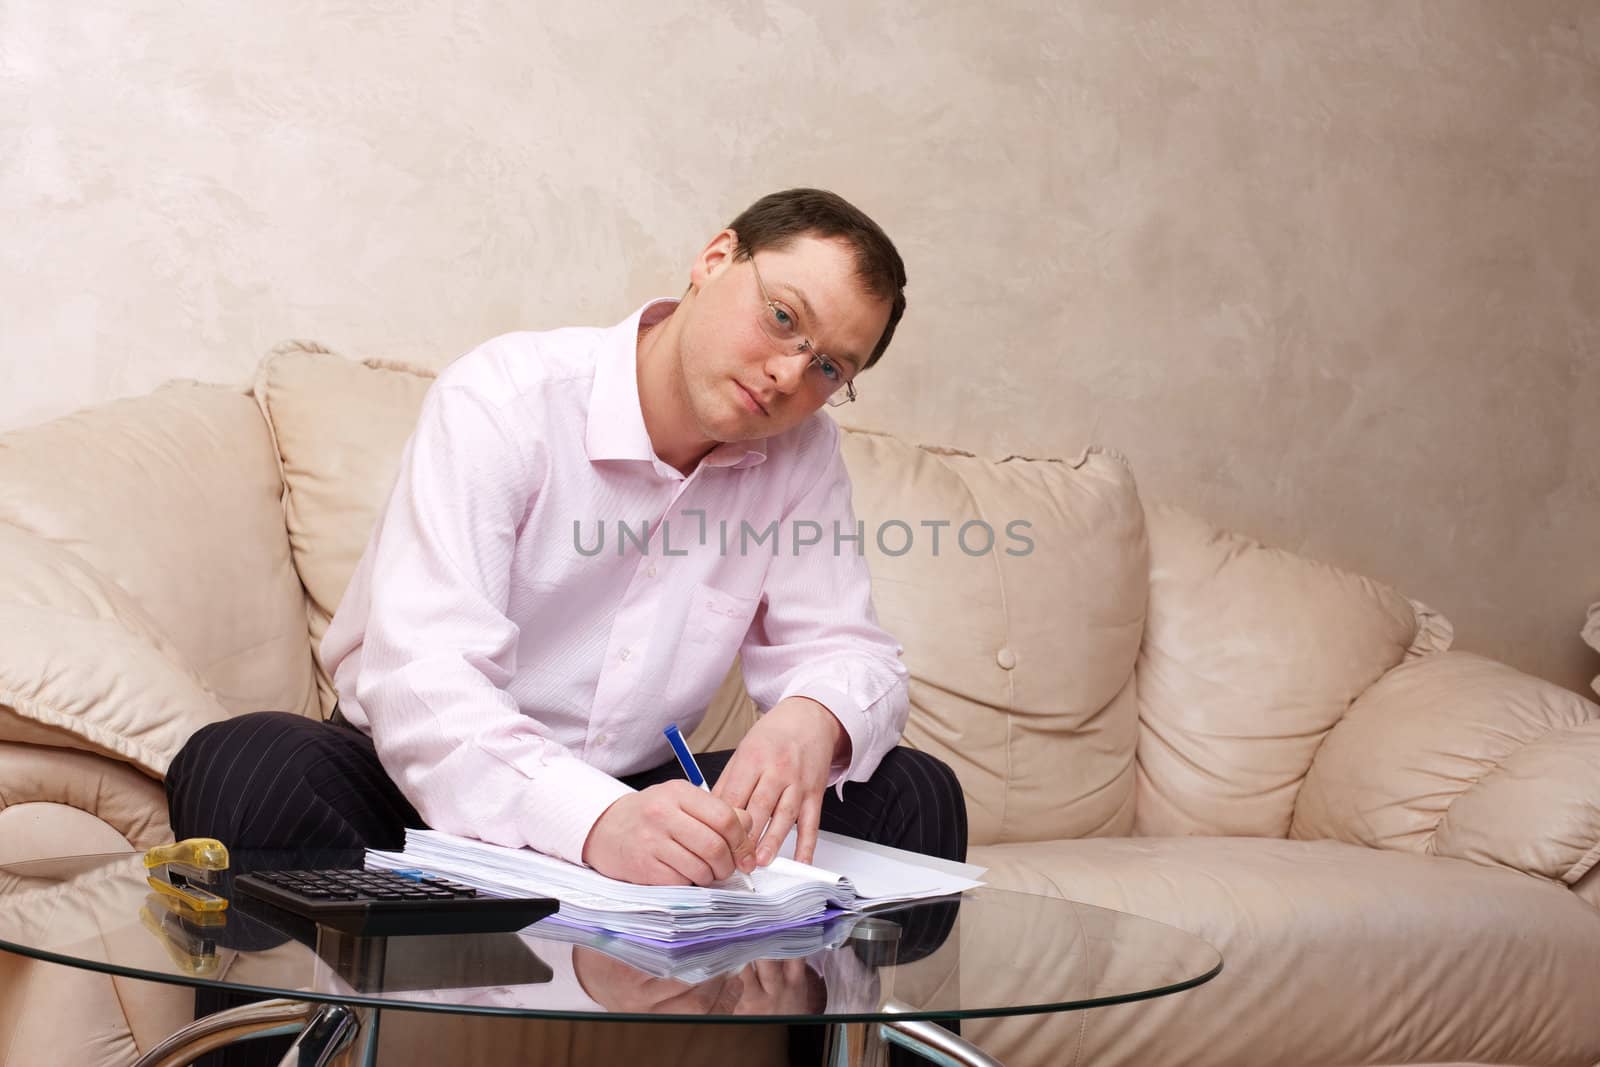 people series: young serious man sign document